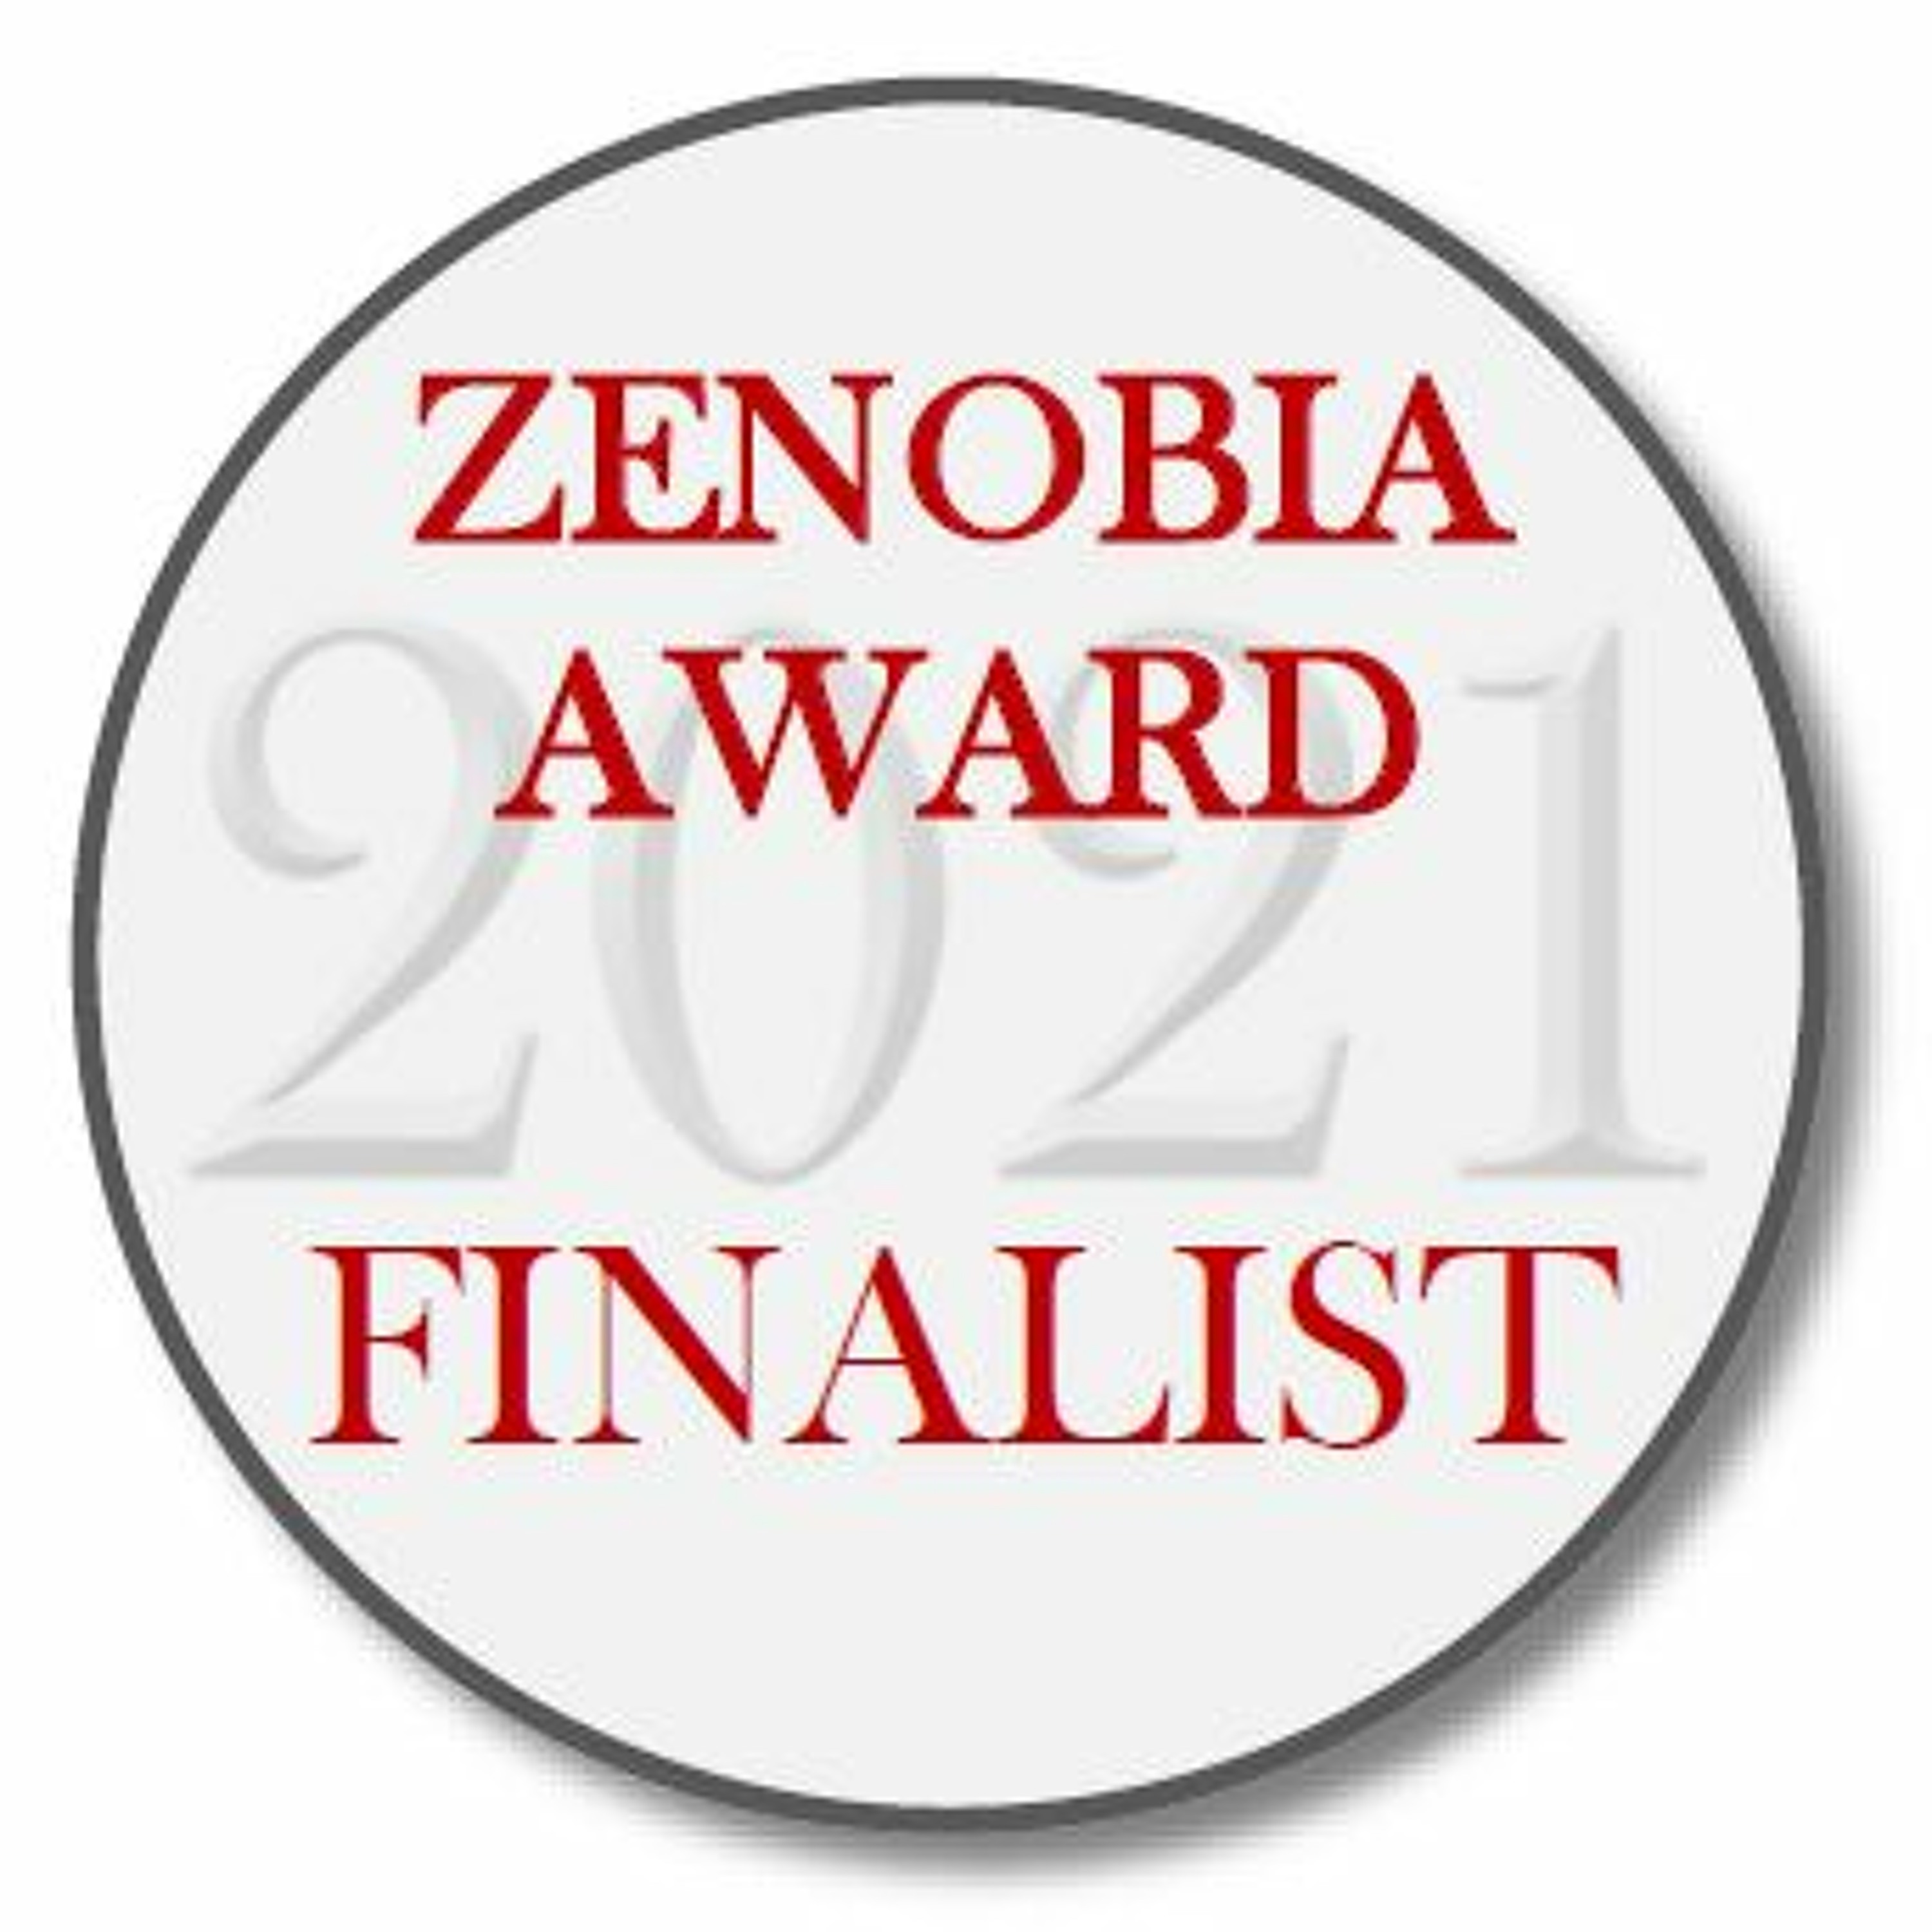 The Zenobia Award 2021 announces the 8 Finalists and 2 honorable mentions